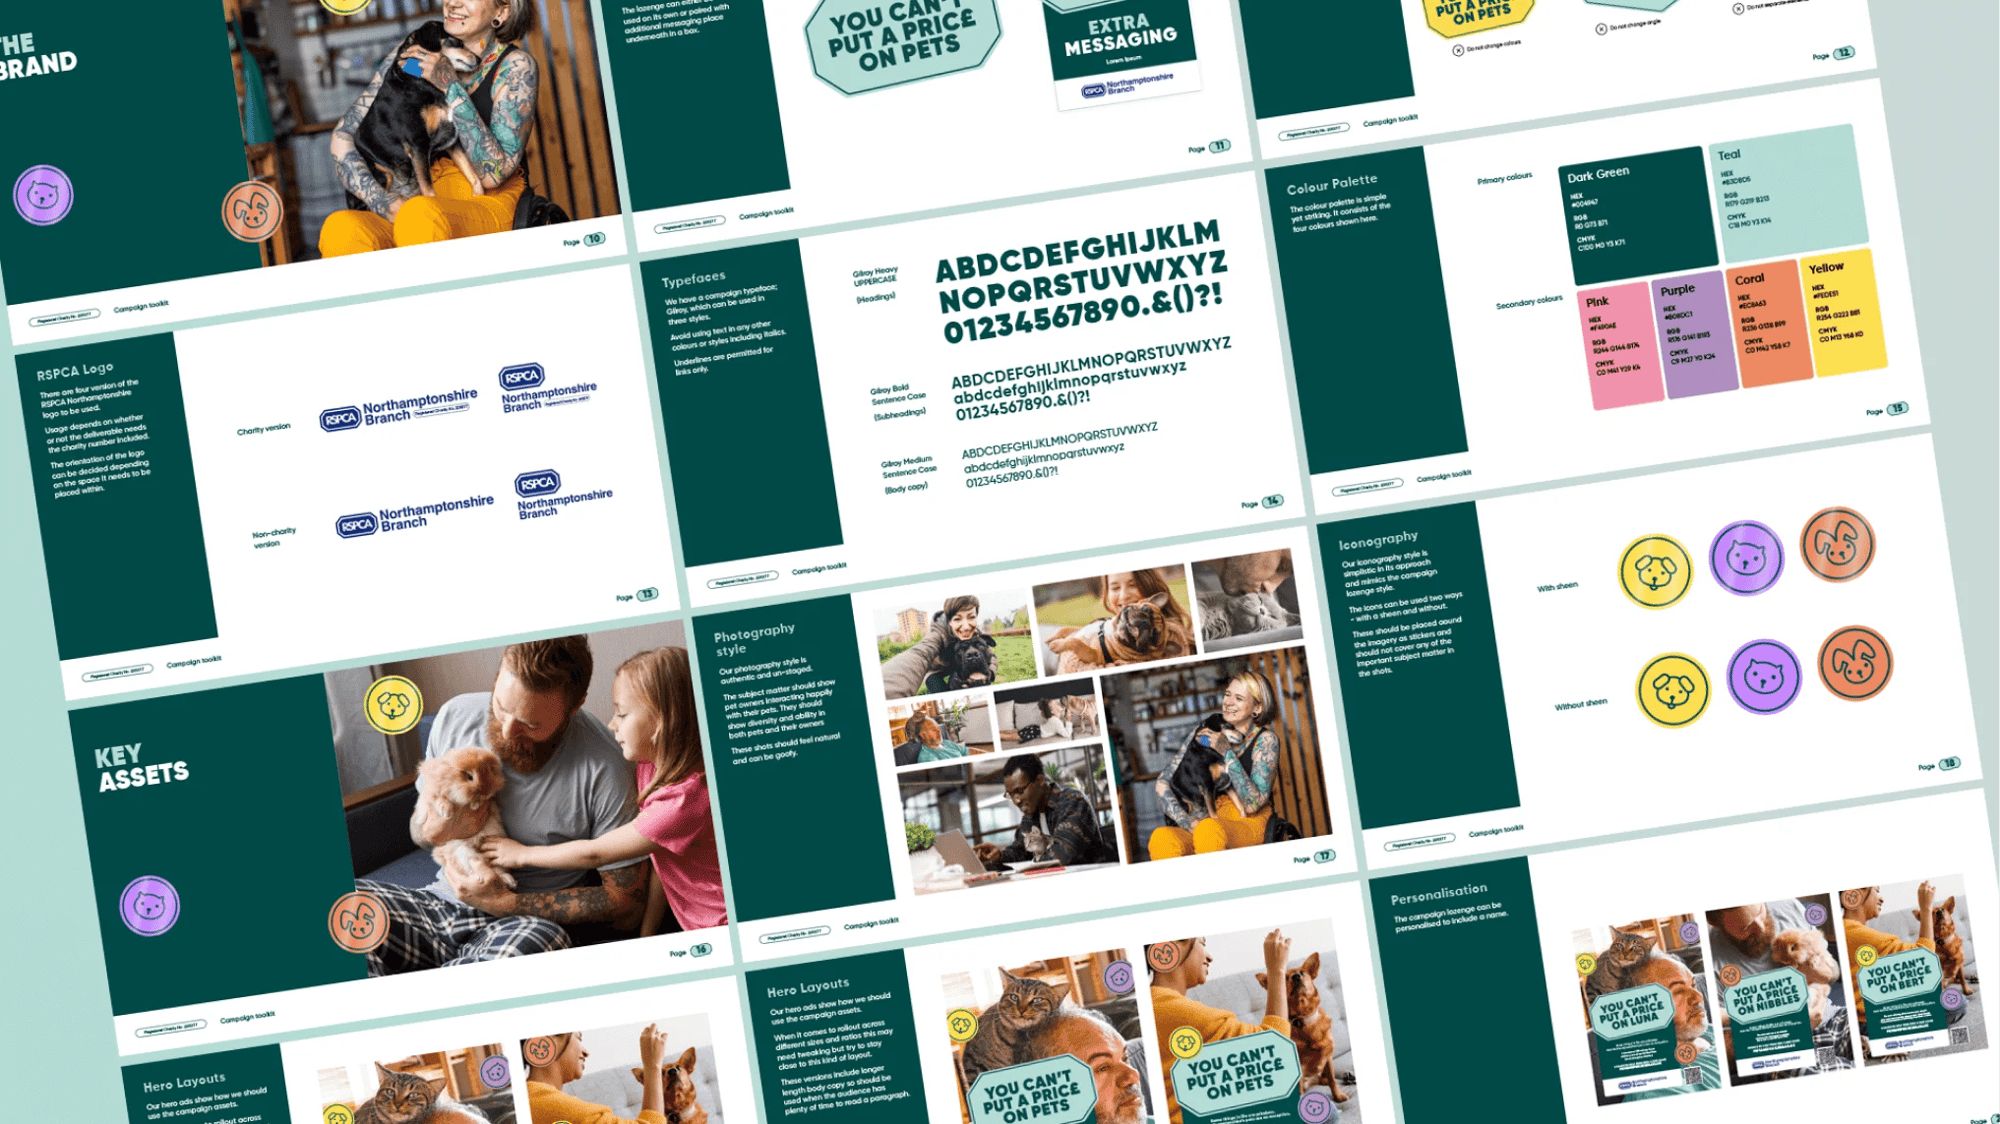 A mock up of the campaign toolkit we created for the charity to use.